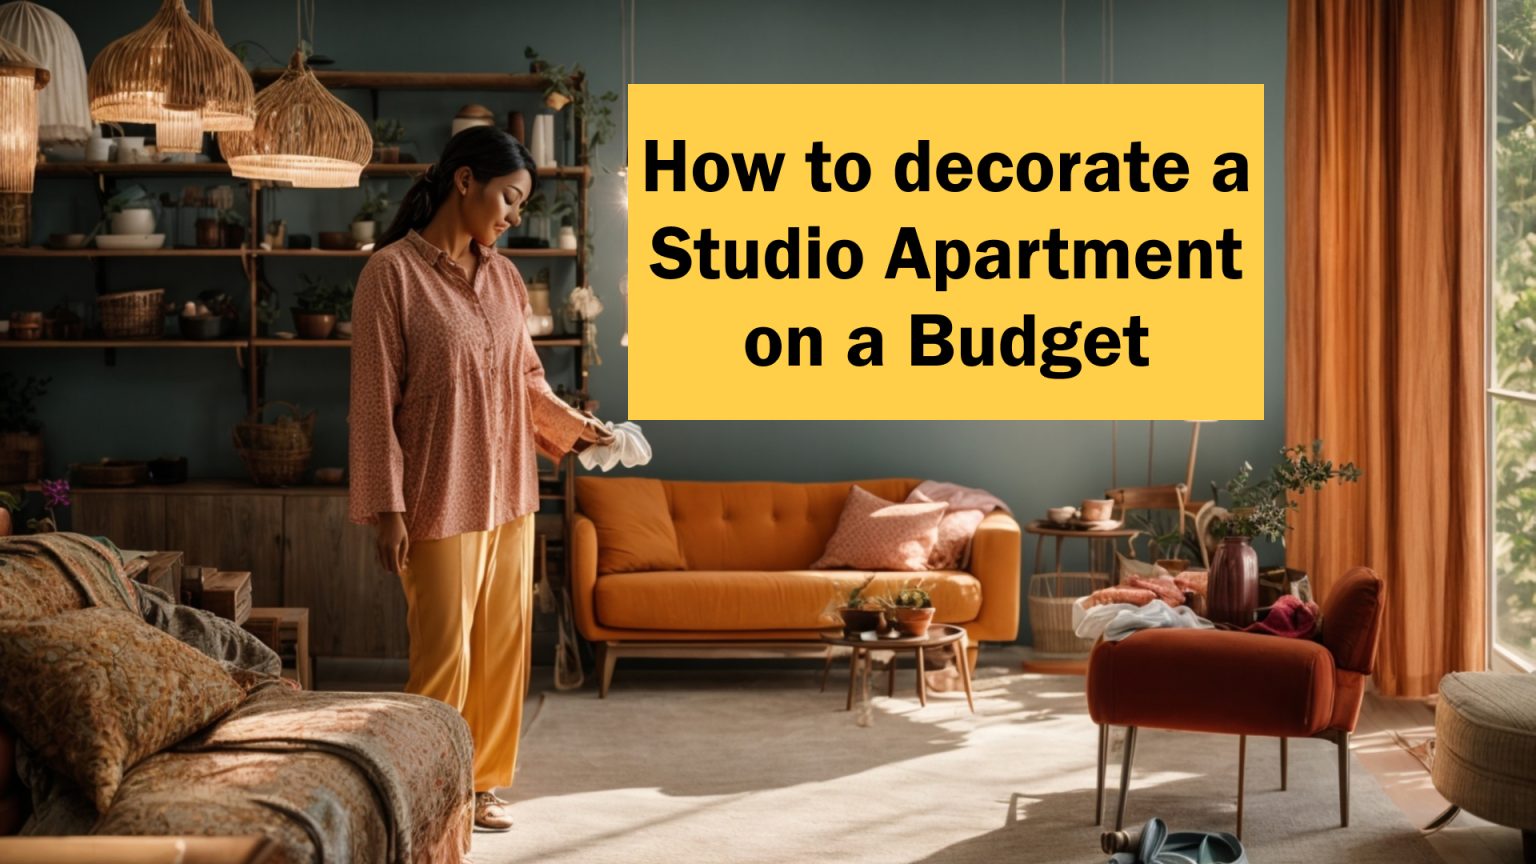 How to decorate Studio Apartment on a budget